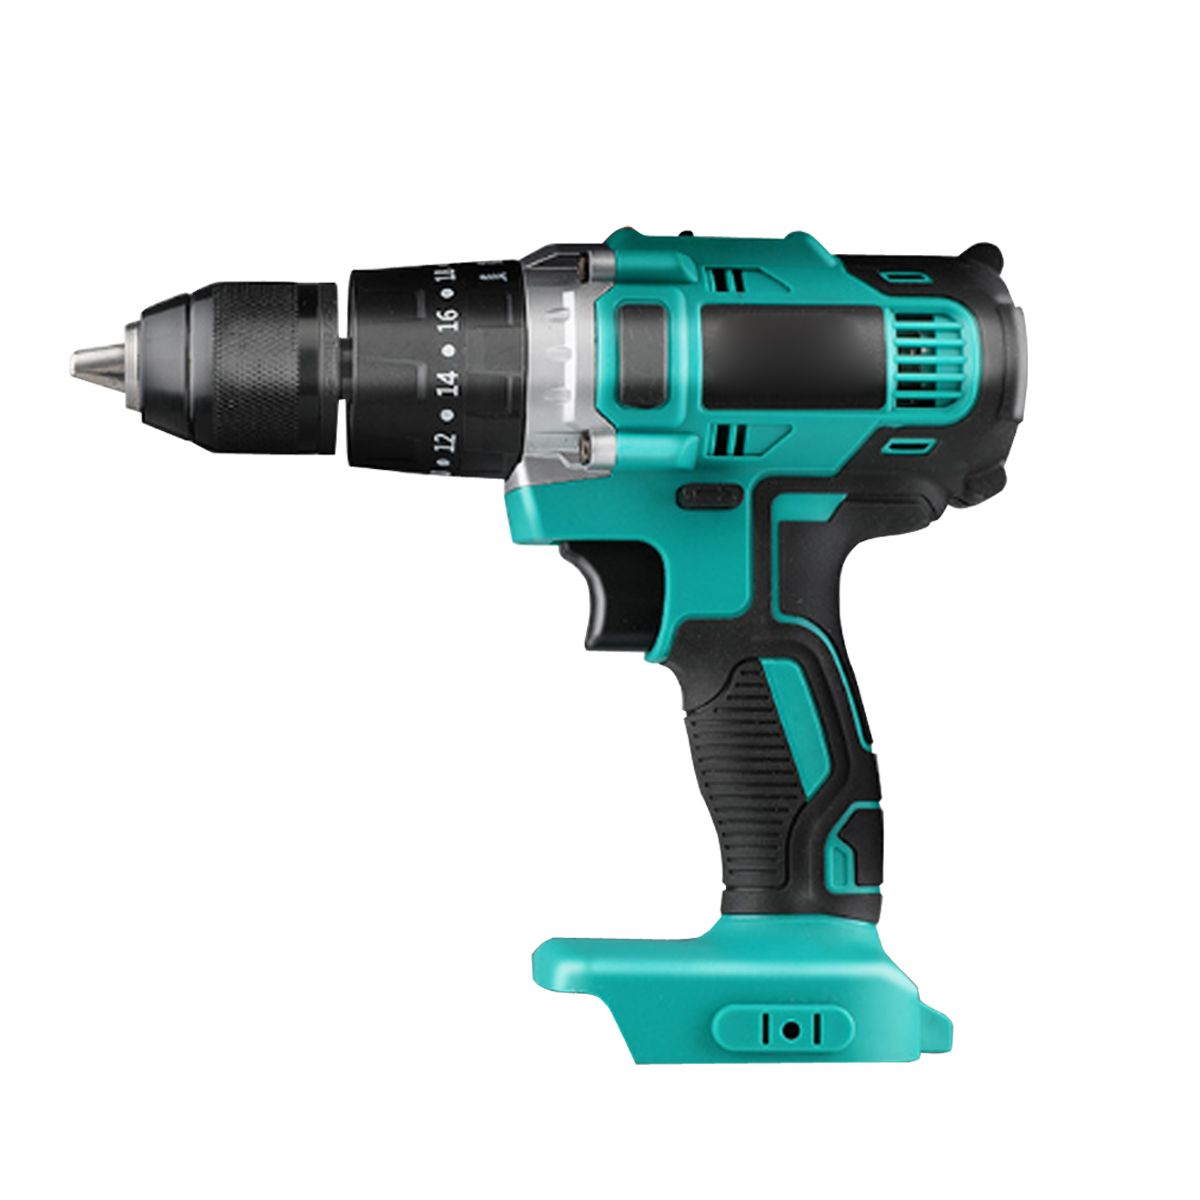 3-in-1-Cordless-Impact-Drill-13mm-Rechargeable-Hammer-Drill-Electric-Screwdriver-For-18V-Battery-1647483